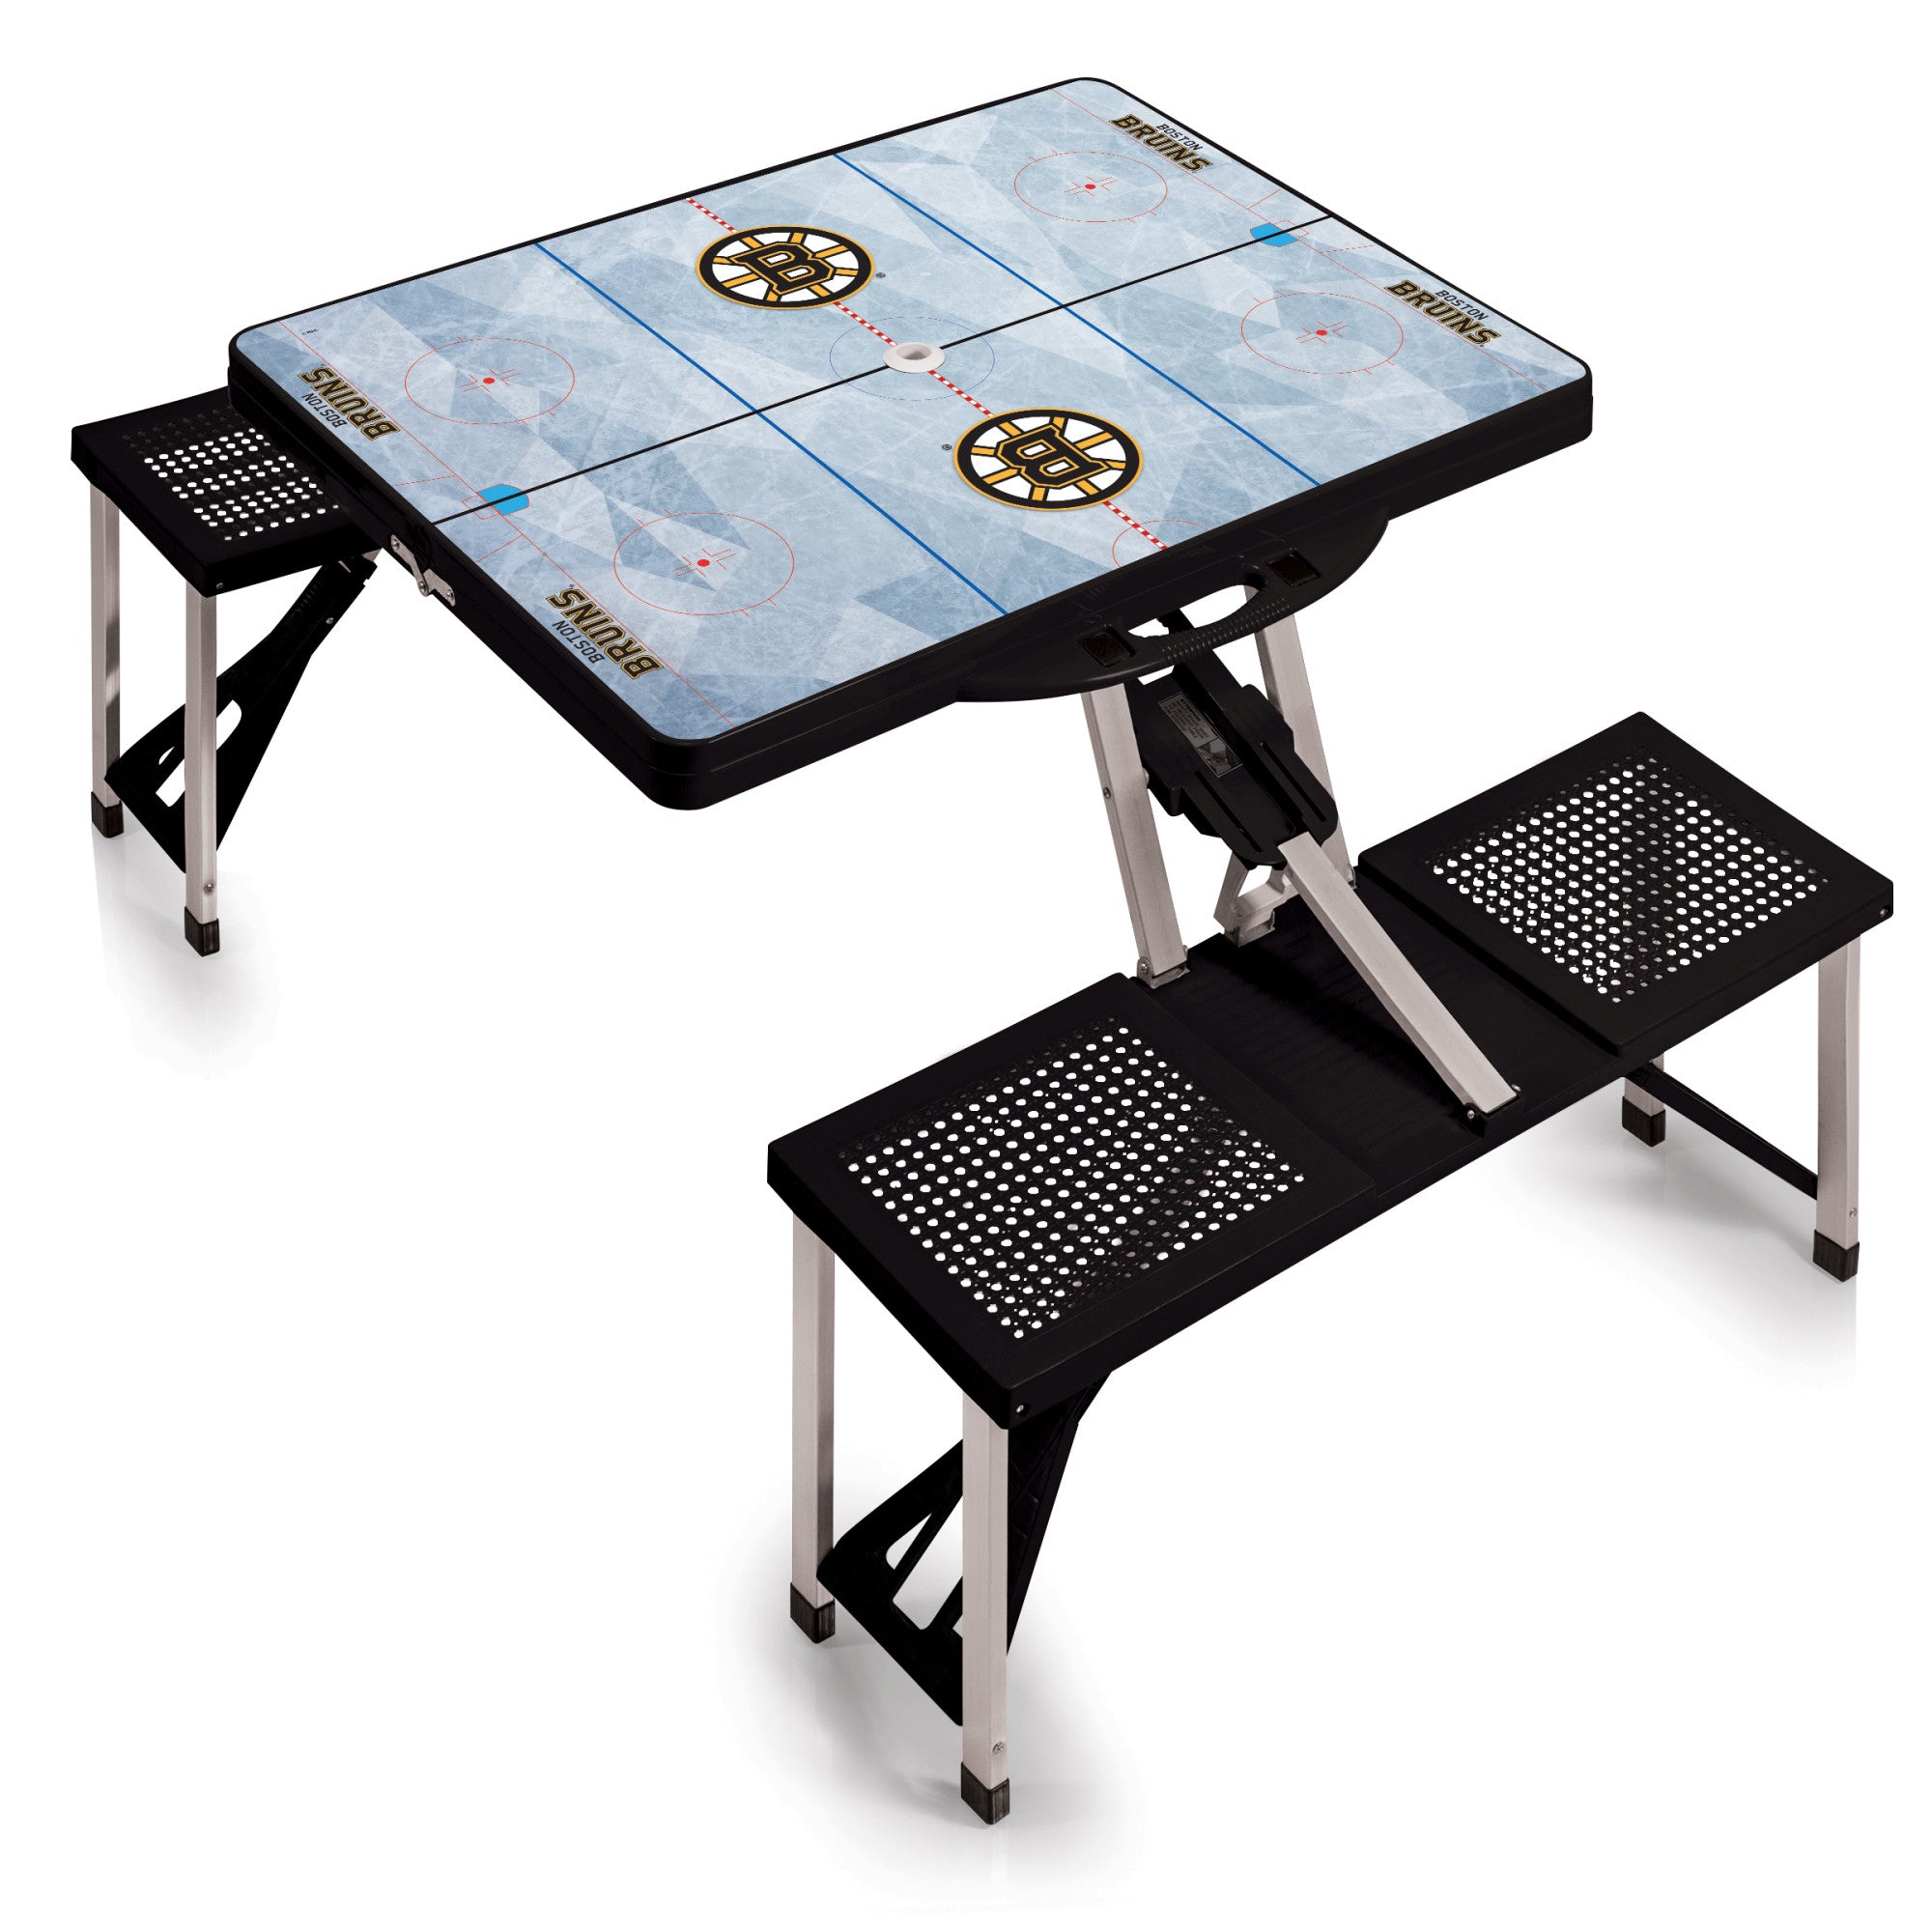 Boston Bruins Hockey Rink - Picnic Table Portable Folding Table with Seats